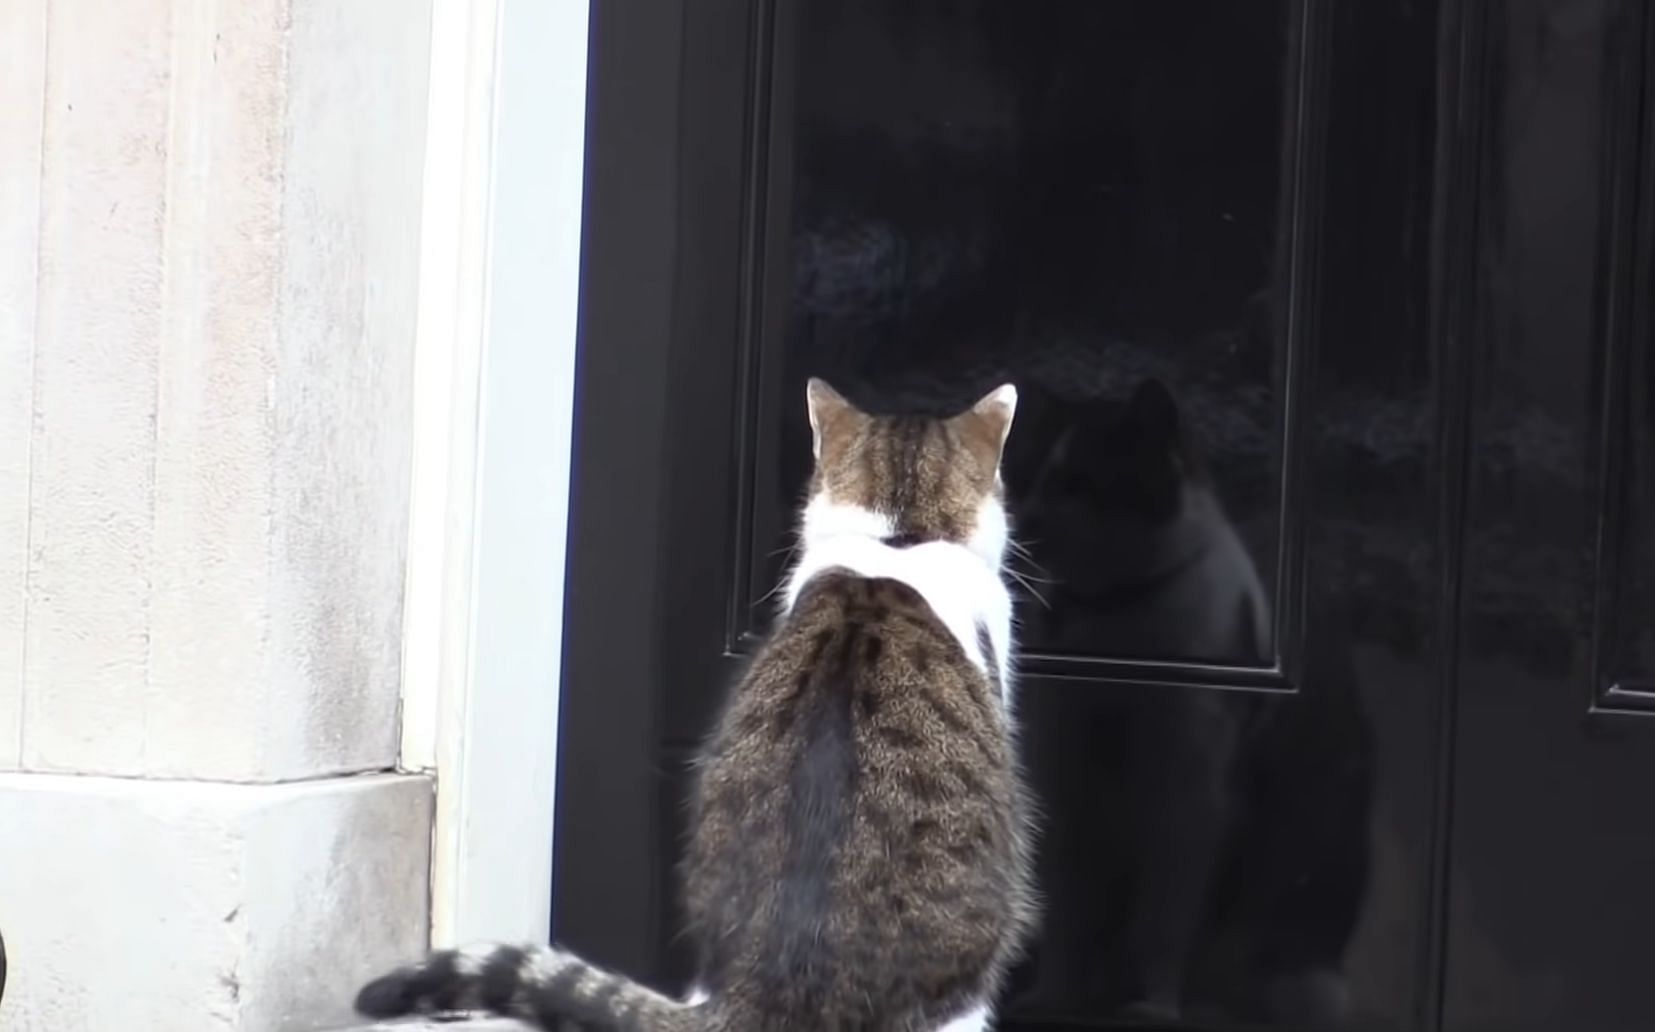 Larry the Cat has been Chief Mouser to the Cabinet Office at 10 Downing Street since February 2011 (Image via The Sun)